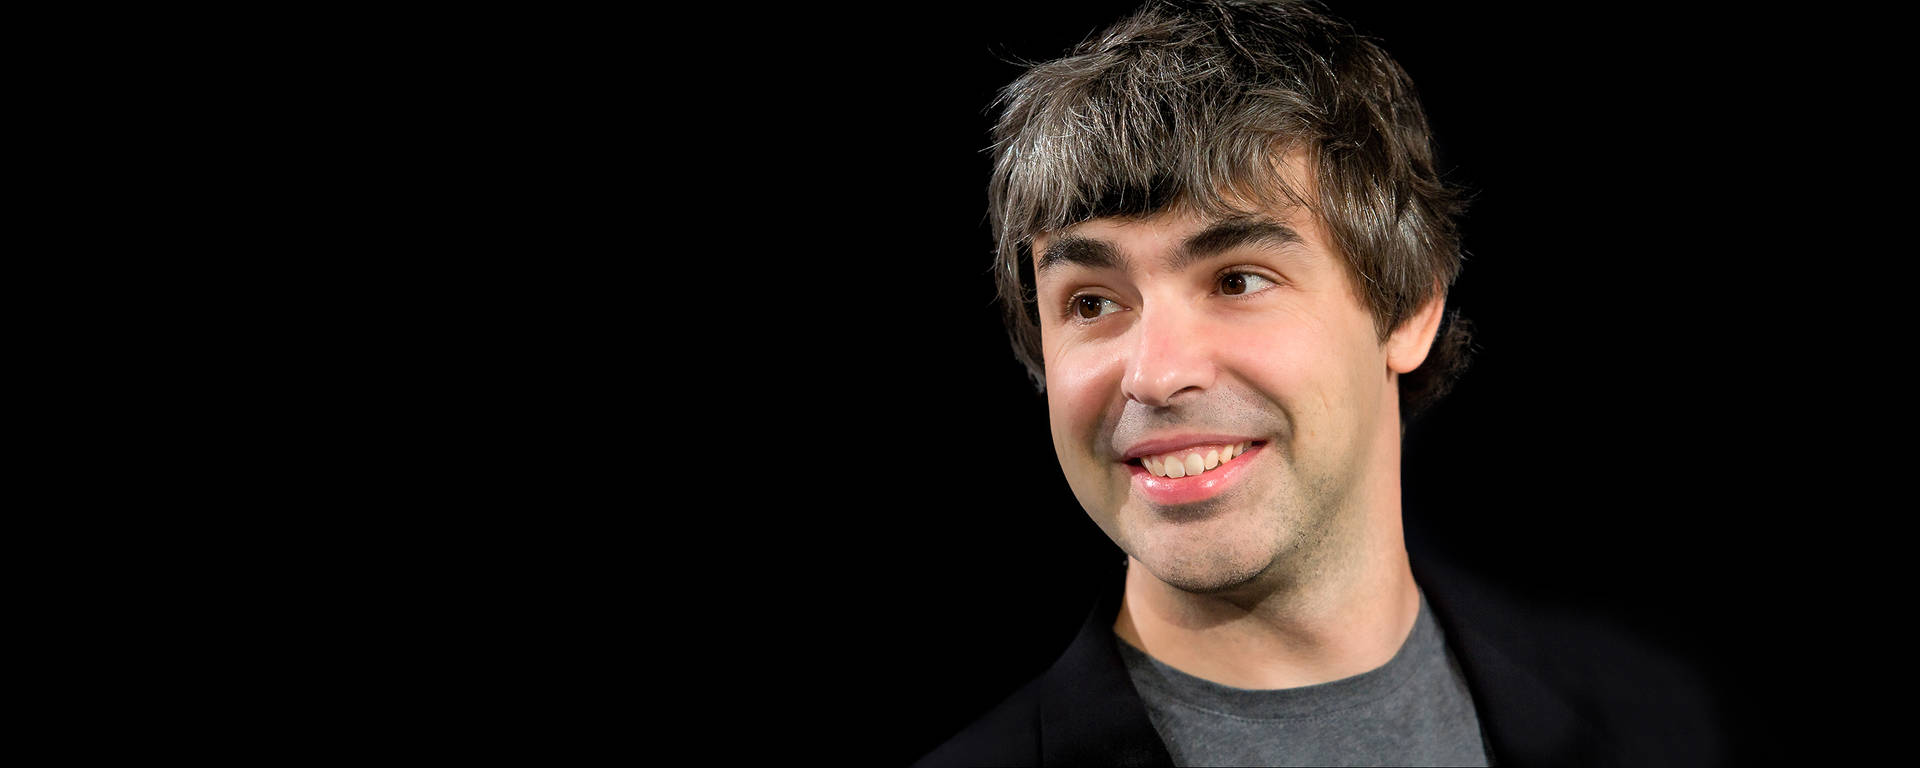 Larry Page Google Founder Interview Photography Wallpaper